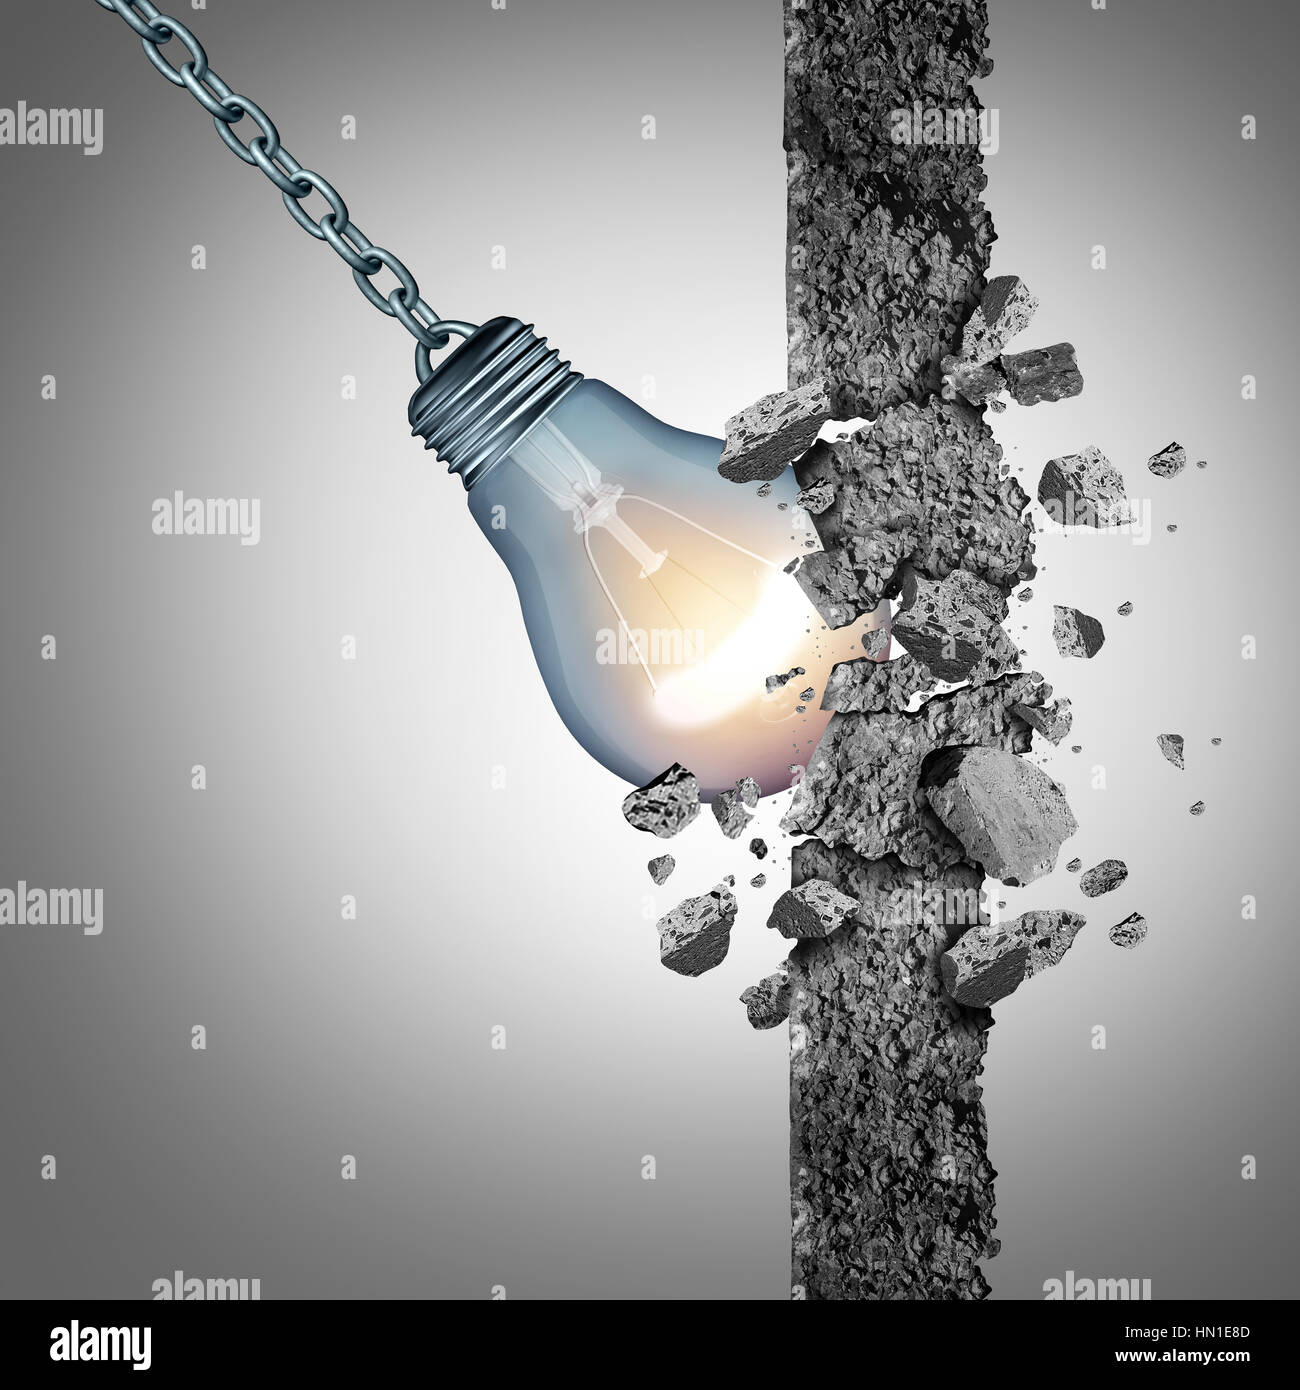 Idea breakthrough and the power to demolish an obstacle with creative thinking and innovative solutions as a light bulb shaped as a wrecking ball with Stock Photo